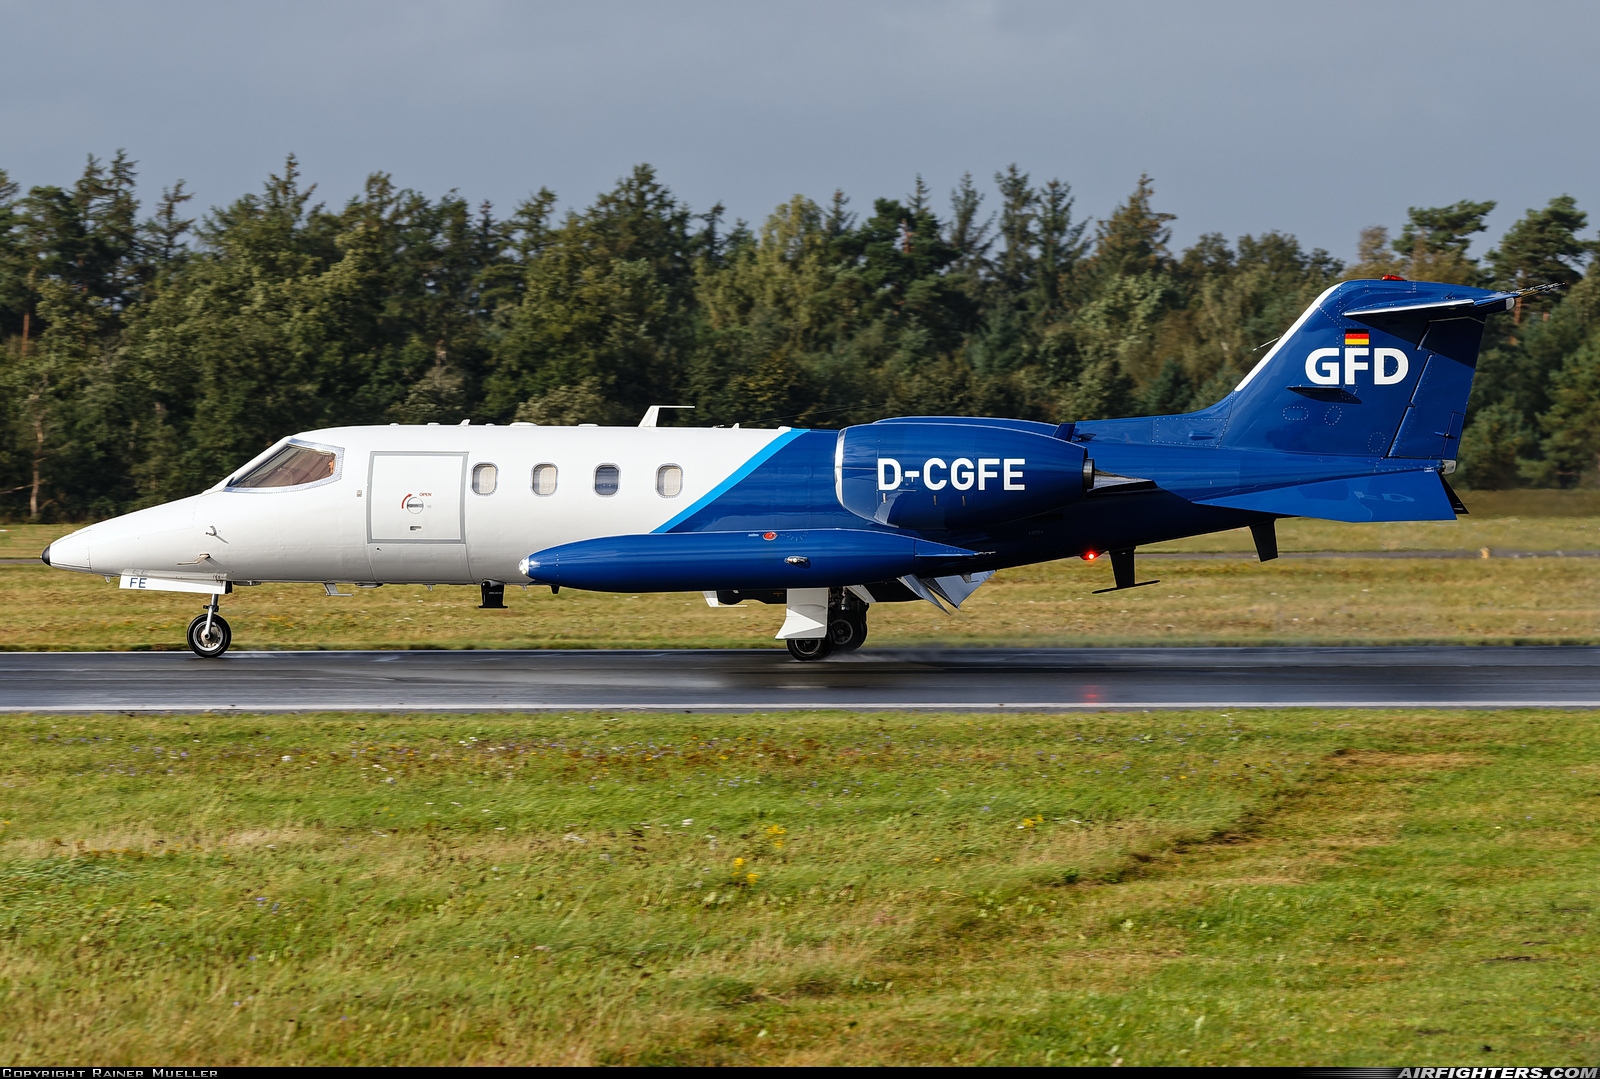 Company Owned - GFD Learjet UC-36A D-CGFE at Hohn (ETNH), Germany